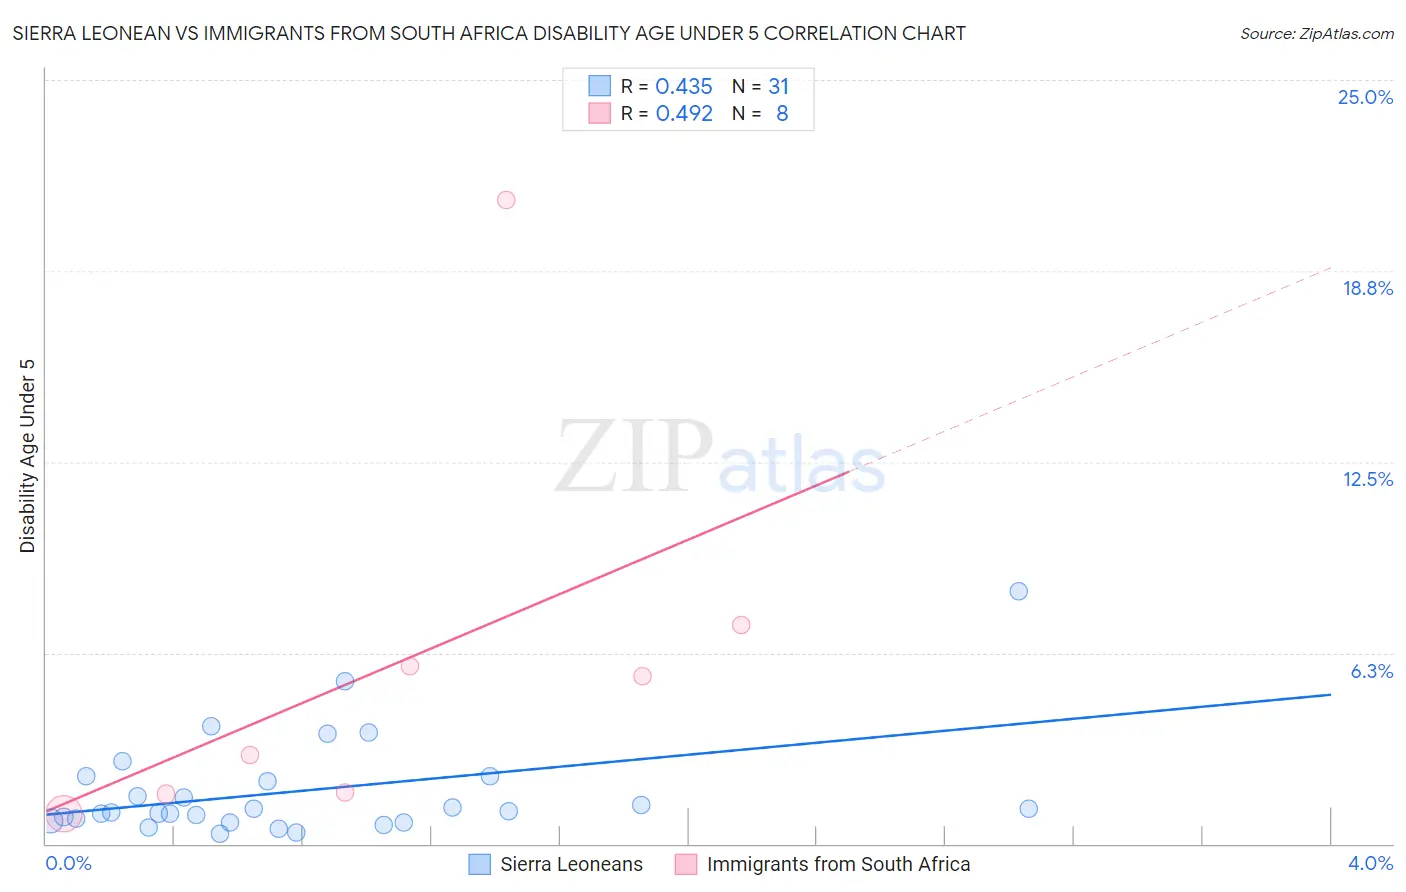 Sierra Leonean vs Immigrants from South Africa Disability Age Under 5